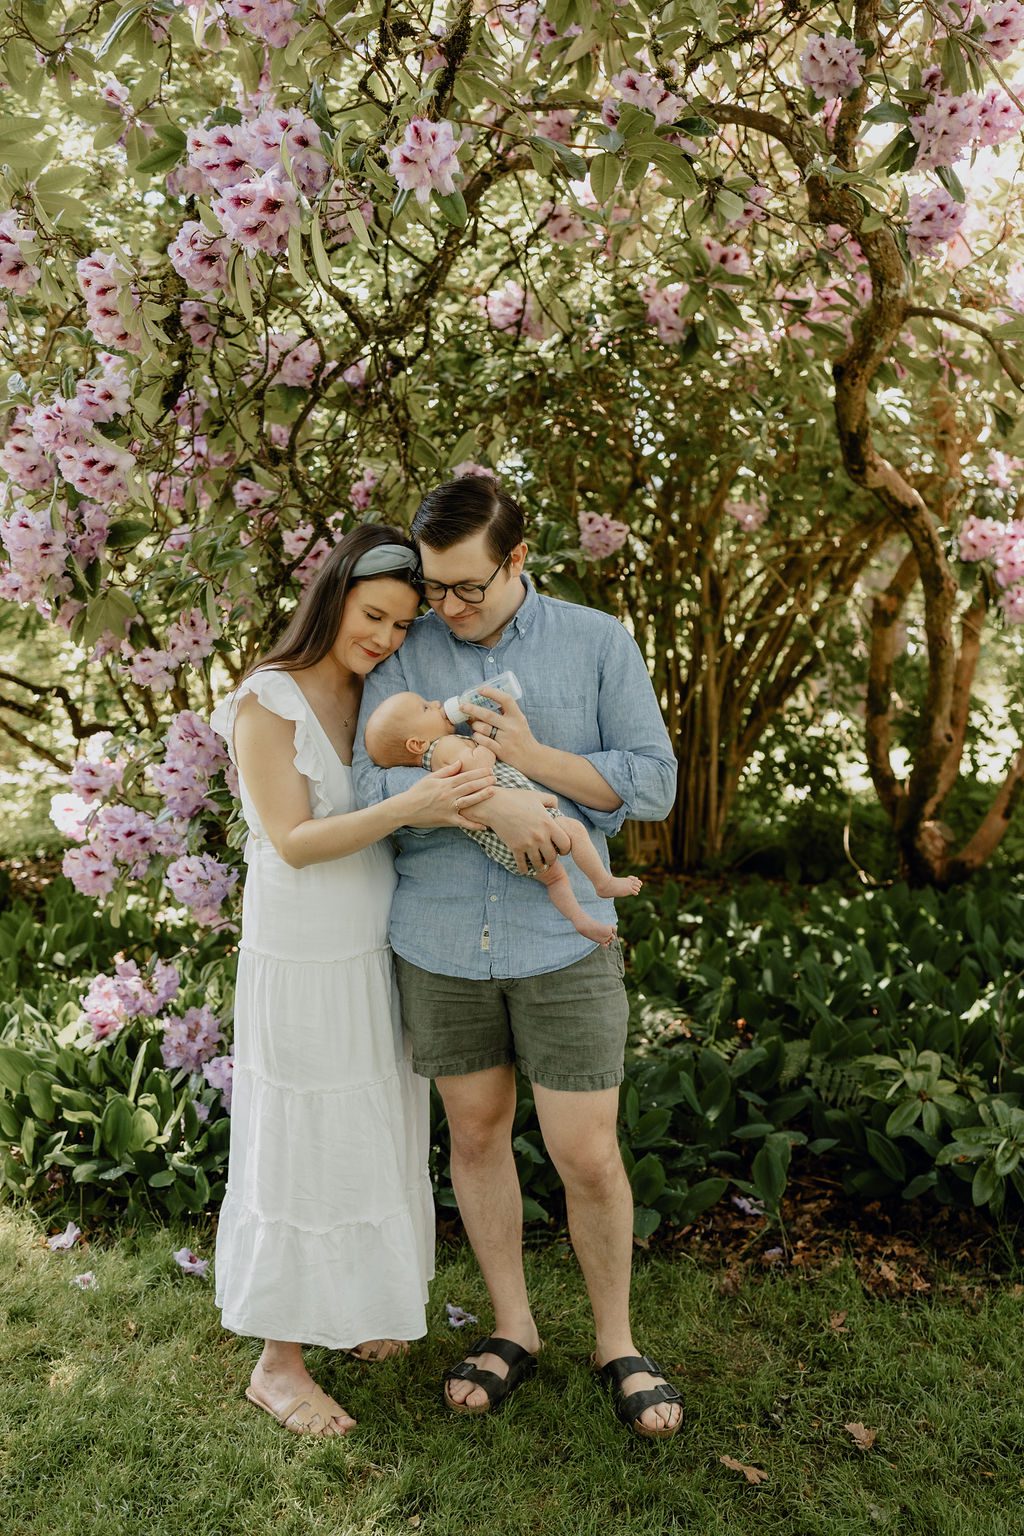 Outdoor spring newborn session at Hendricks Park, a beautiful location option for spring photo sessions